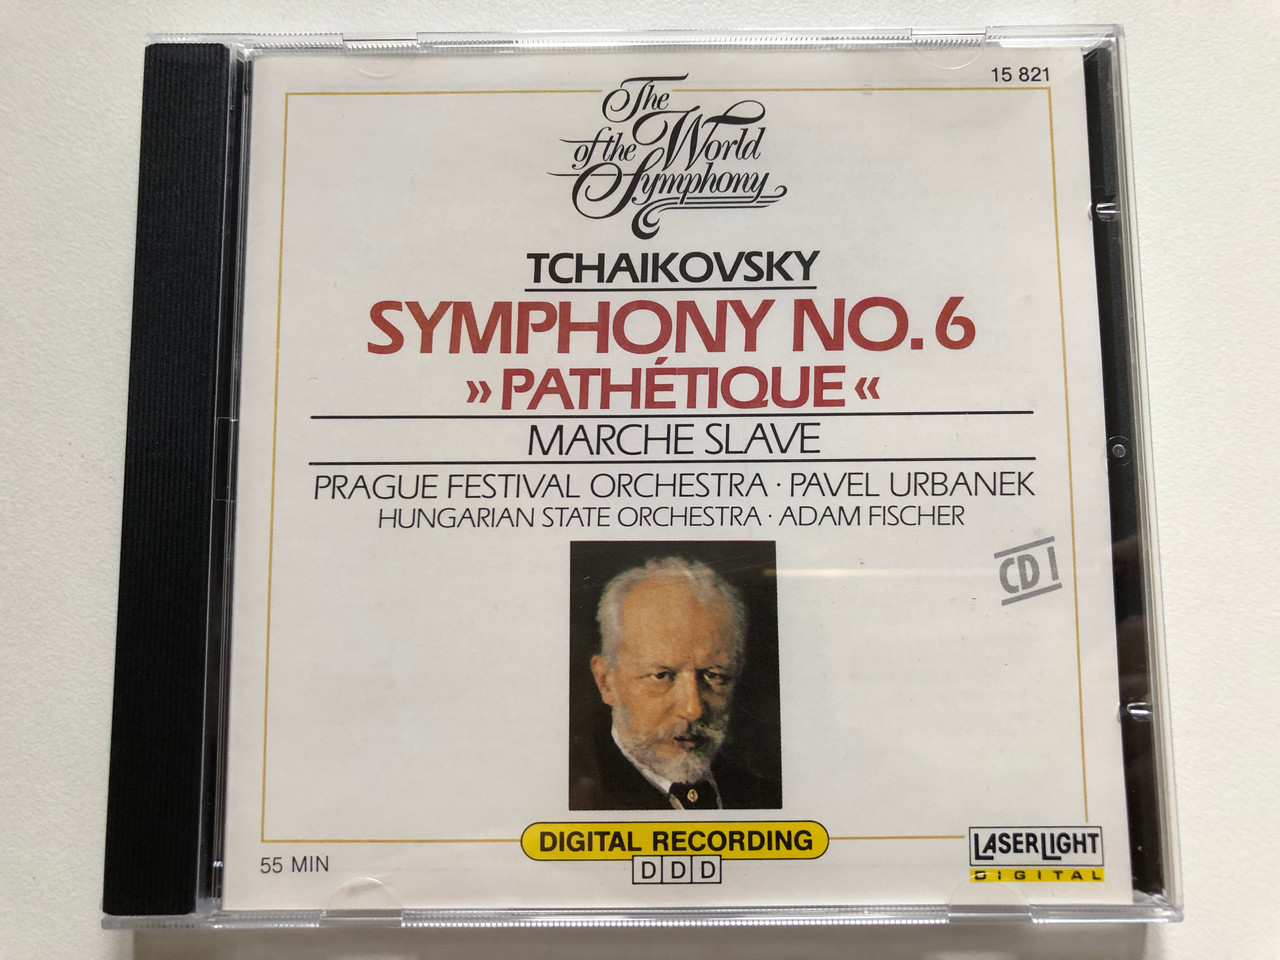 https://cdn10.bigcommerce.com/s-62bdpkt7pb/products/0/images/306609/Tchaikovsky_Symphony_No._6_Pathtique_-_Marche_Slave_Prague_Festival_Orchestra_Pavel_Urbanek_Hungarian_State_Orchestra_Adam_Fischer_The_World_Of_The_Symphony_CD_1_LaserLight_Digital_A_1__12155.1698313691.1280.1280.JPG?c=2